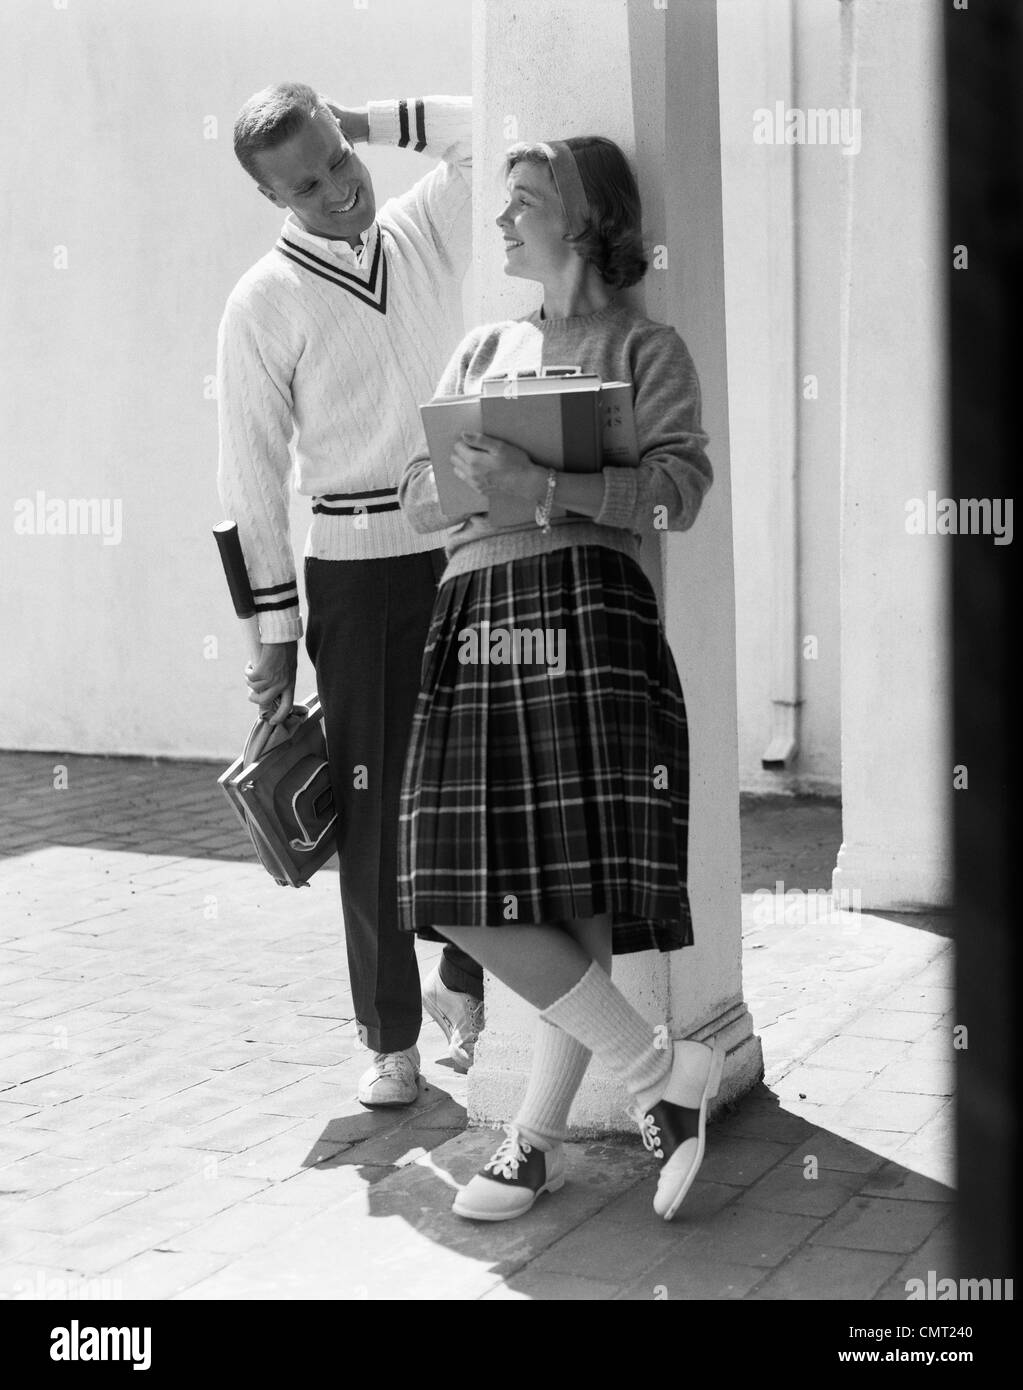 1950s 1960s COLLEGE HIGH SCHOOL AGED TEENAGE BOY & GIRL SMILING FLIRTING  WEARING SADDLE SHOES PLAID PLEATED SKIRT TENNIS SWEATER Stock Photo - Alamy